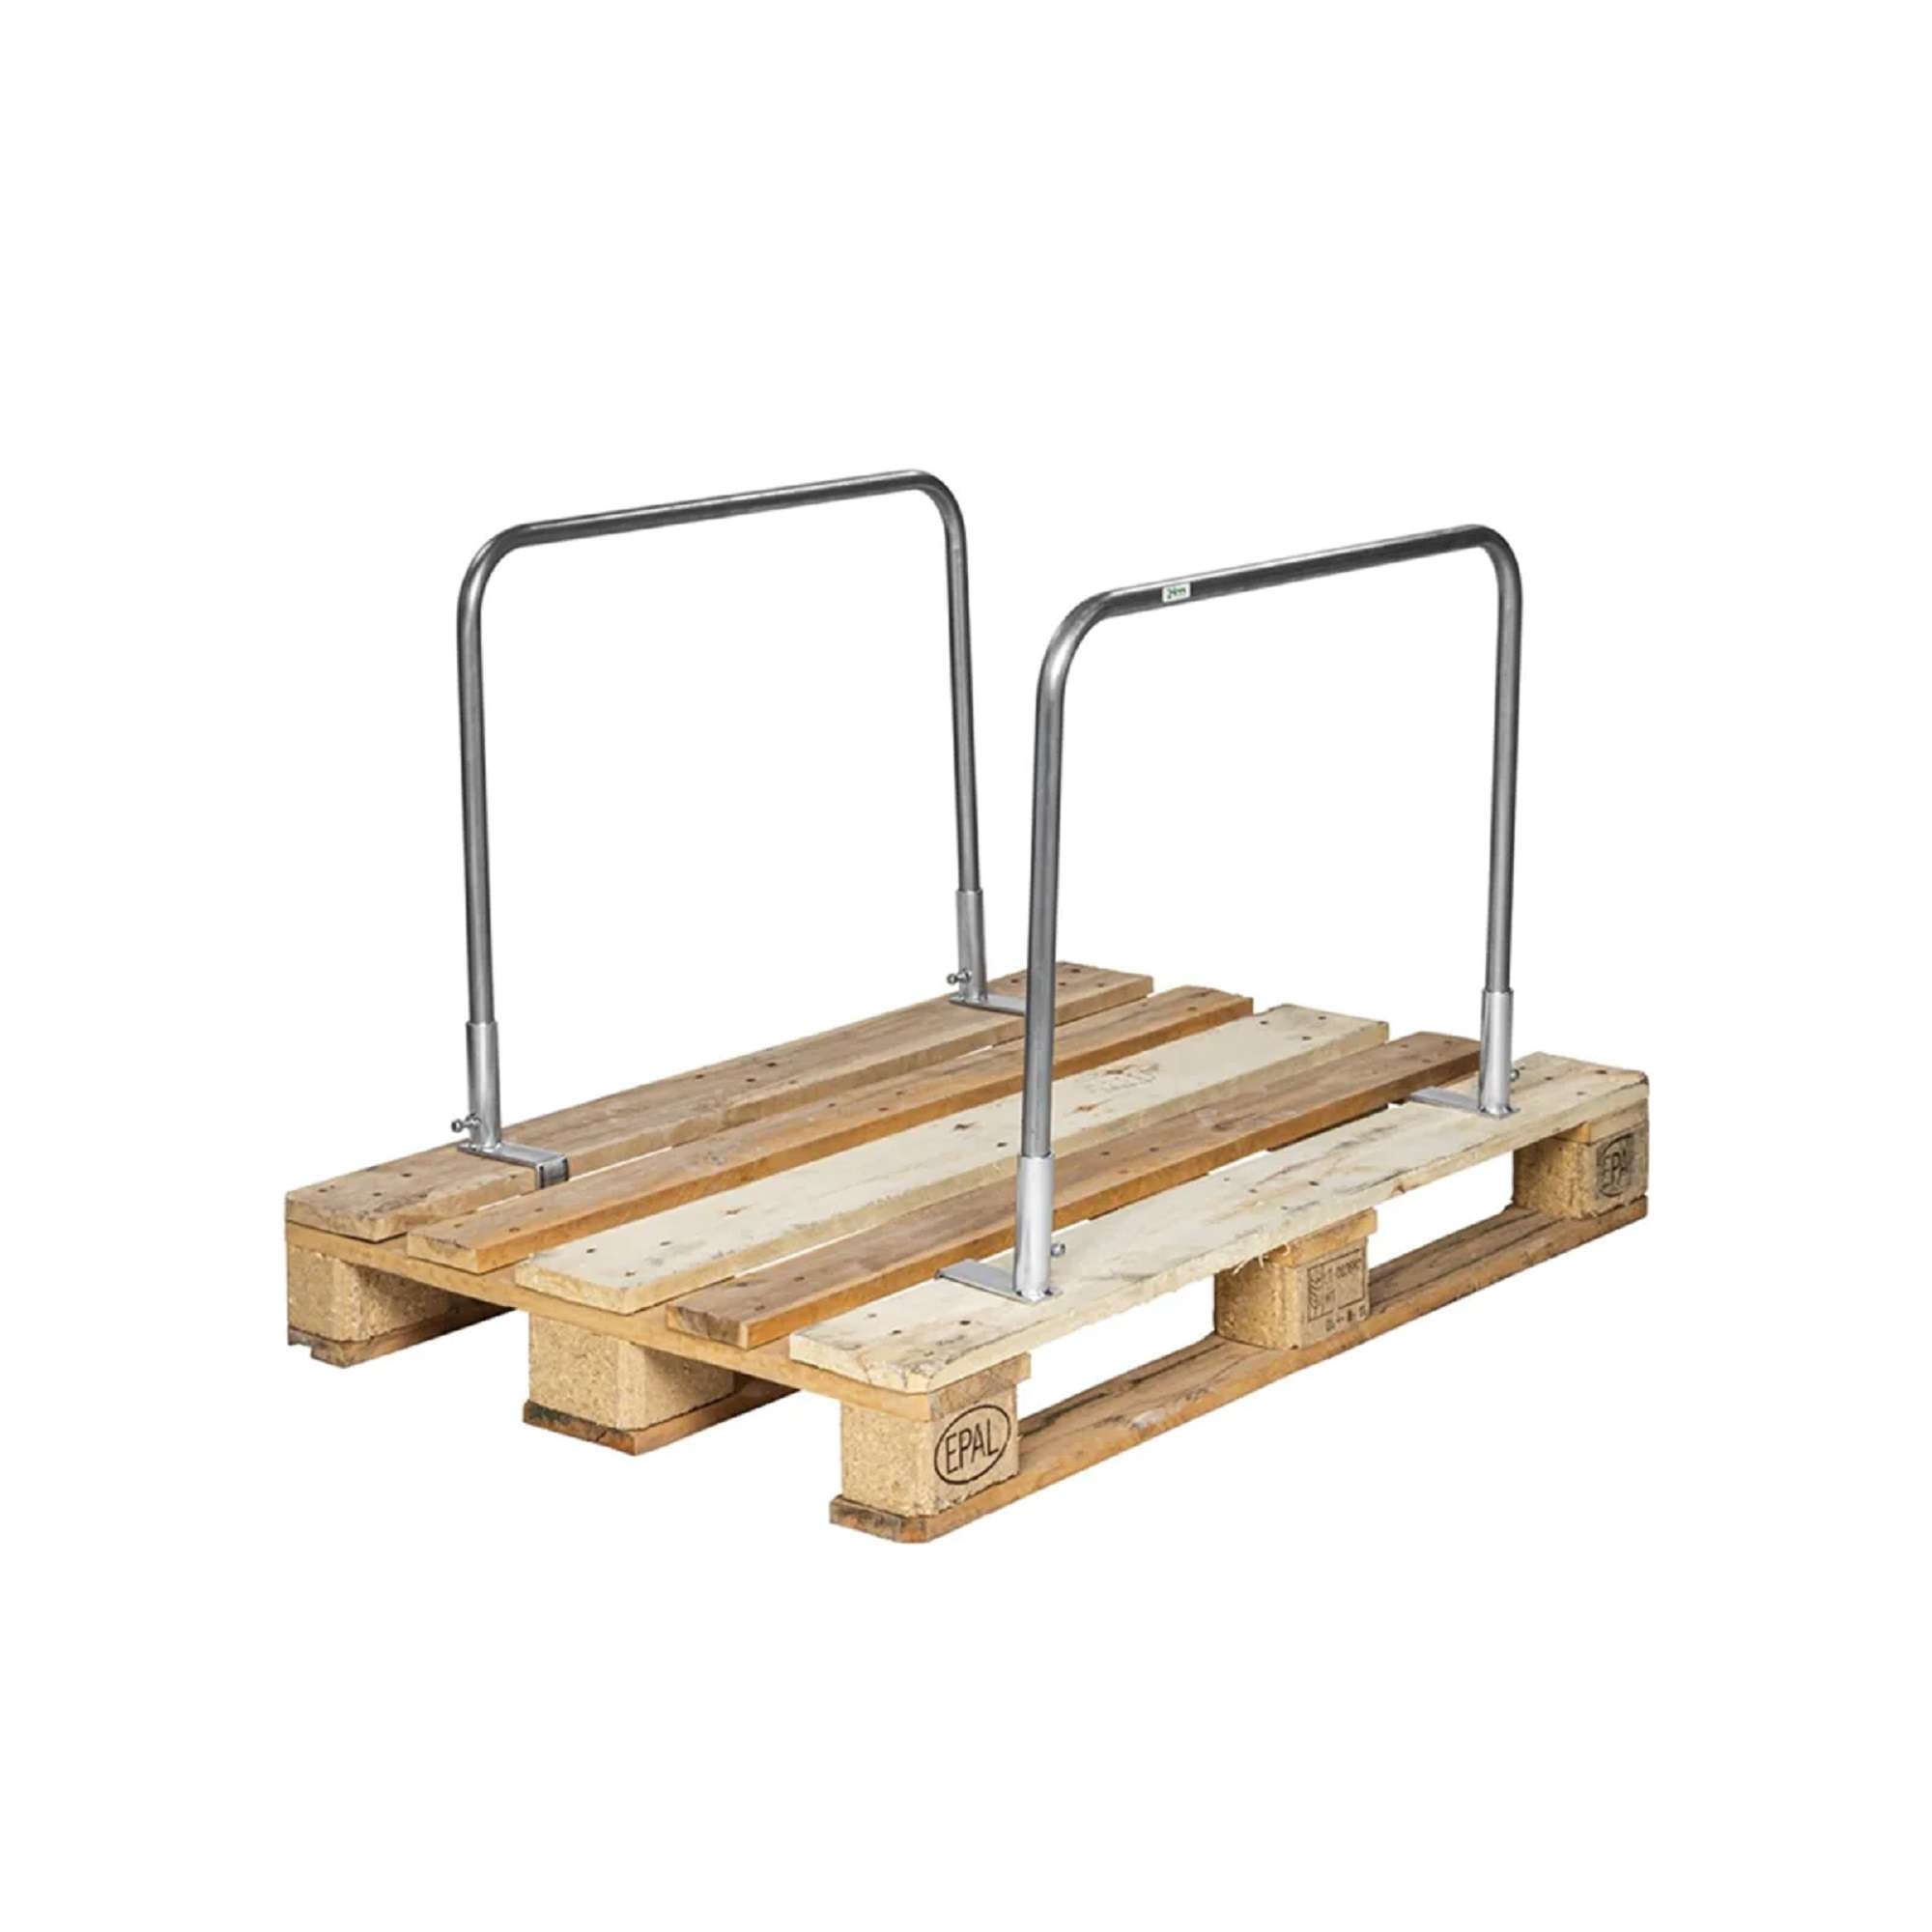 Pallet support, Sold in Pairs L x W x H (mm) 775 x 115 x 600